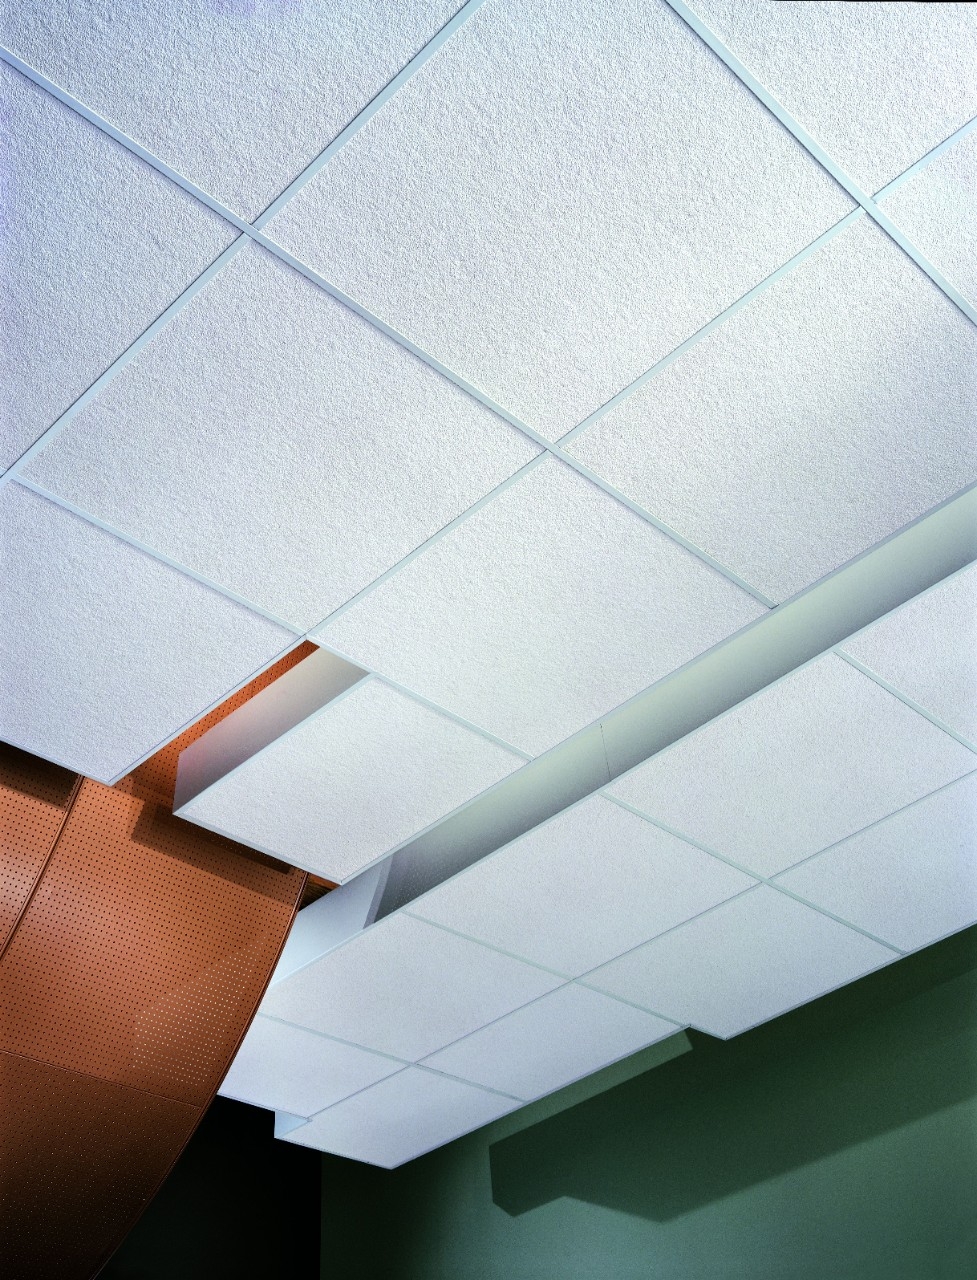 Class C Fire Rated Ceiling Tiles